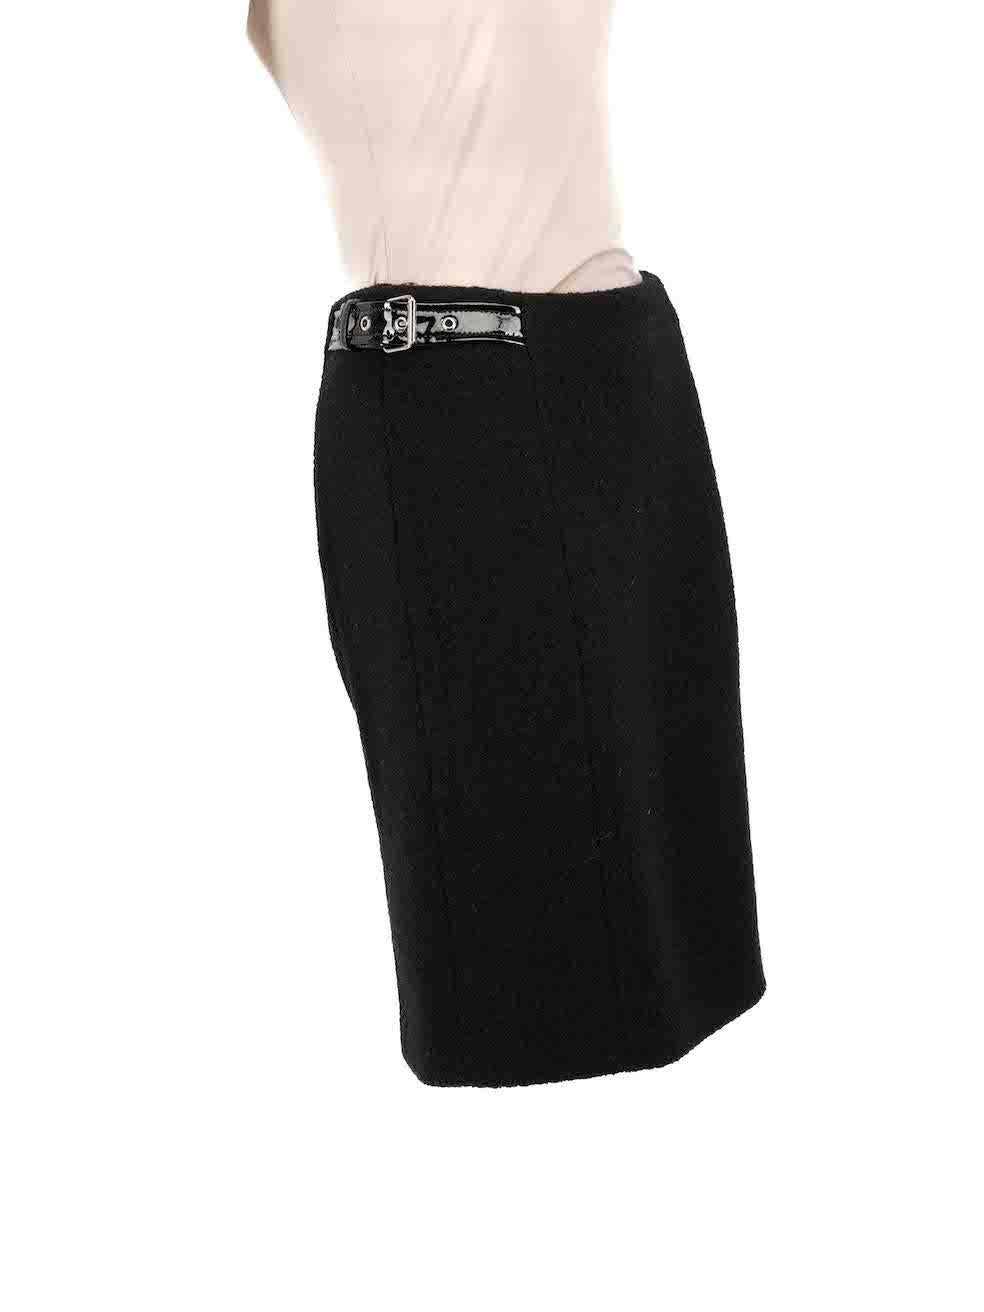 Moschino Black Wool Tweed Belted Knee Length Skirt Size S In Excellent Condition For Sale In London, GB